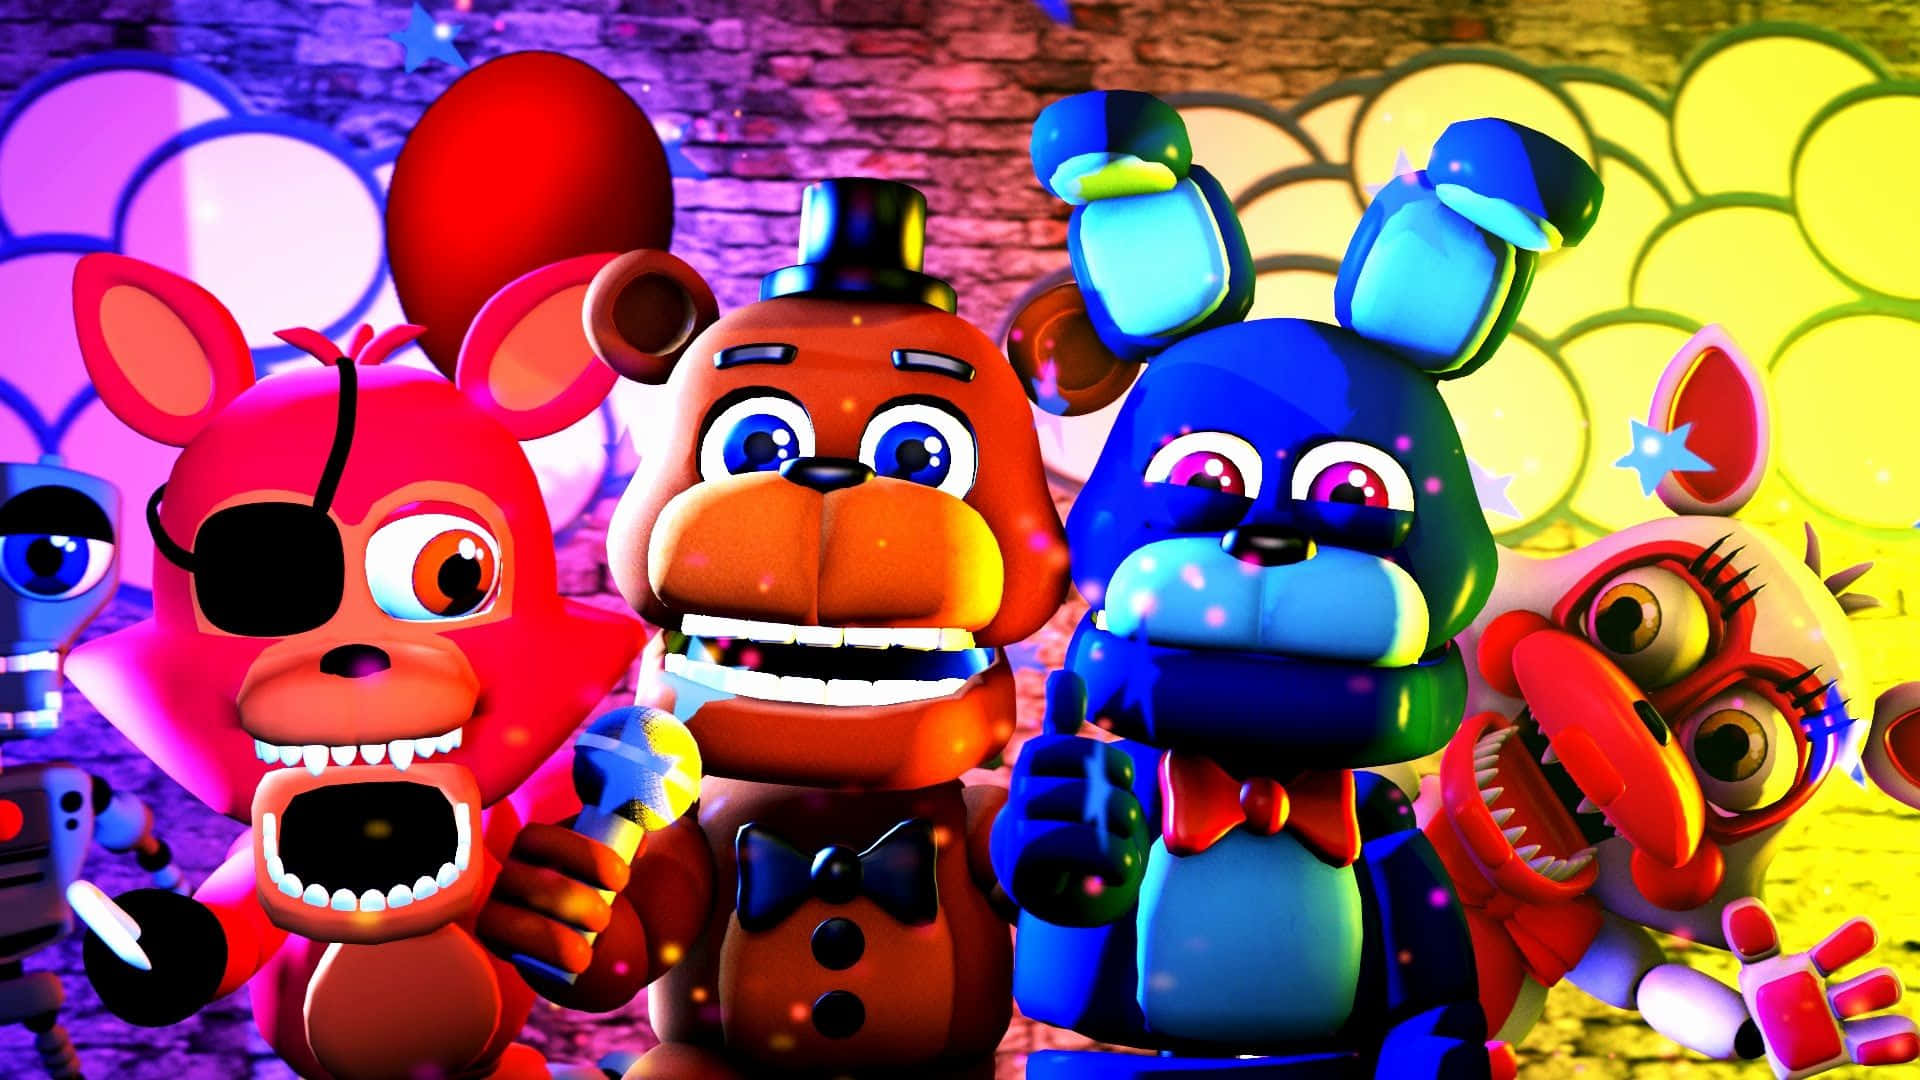 Cute five nights at freddys pictures